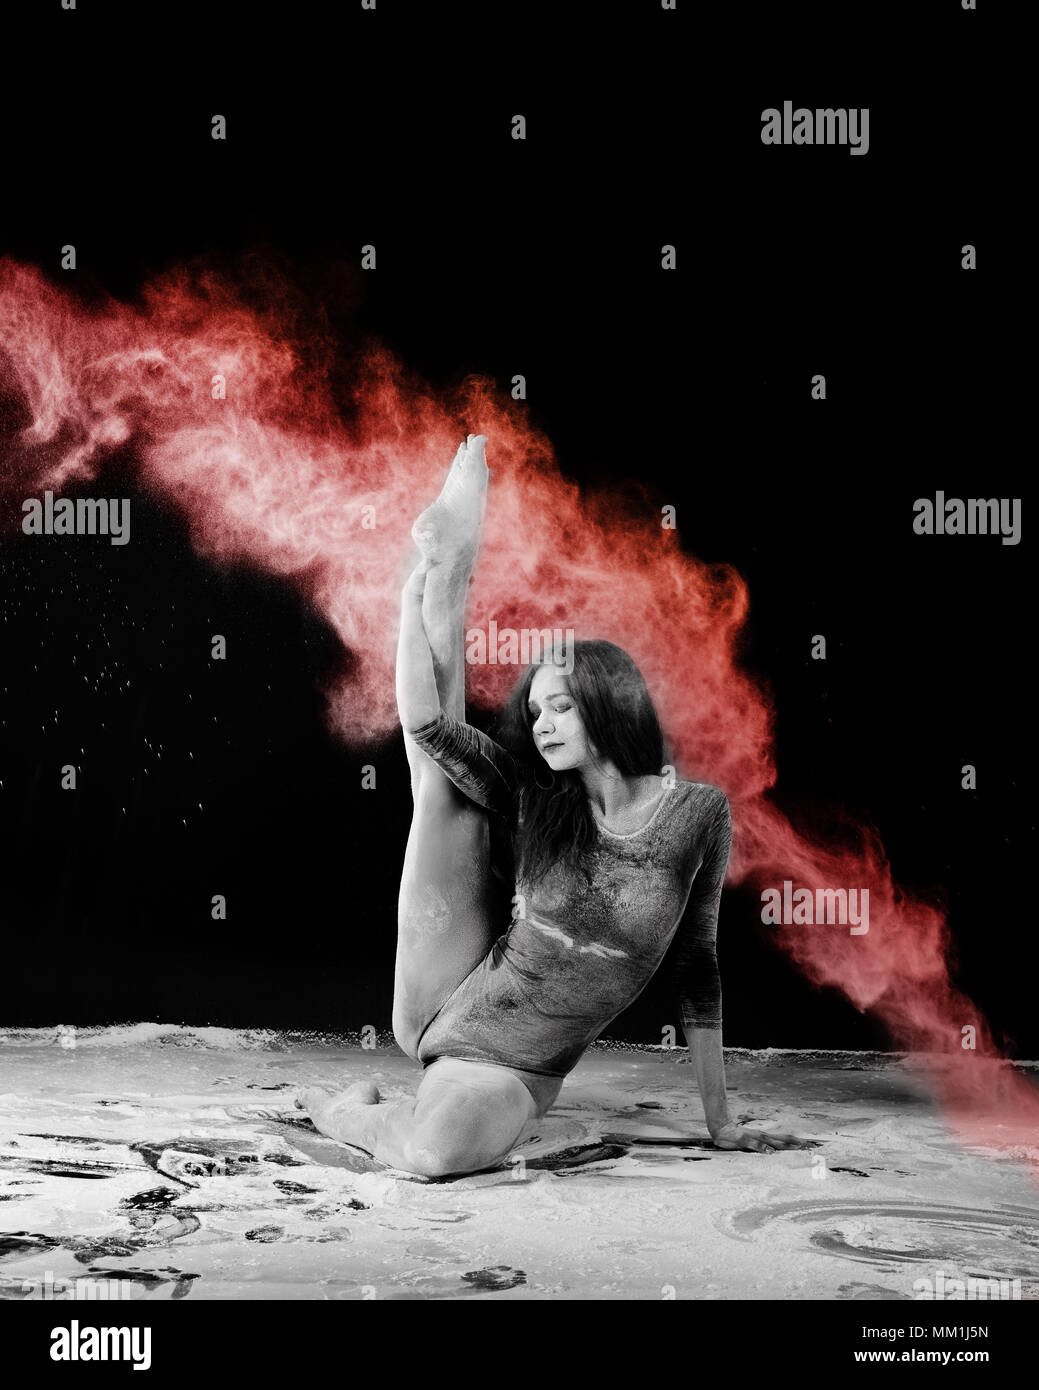 Girl doing gymnastic exercises in a cloud of red dust on a black background Stock Photo